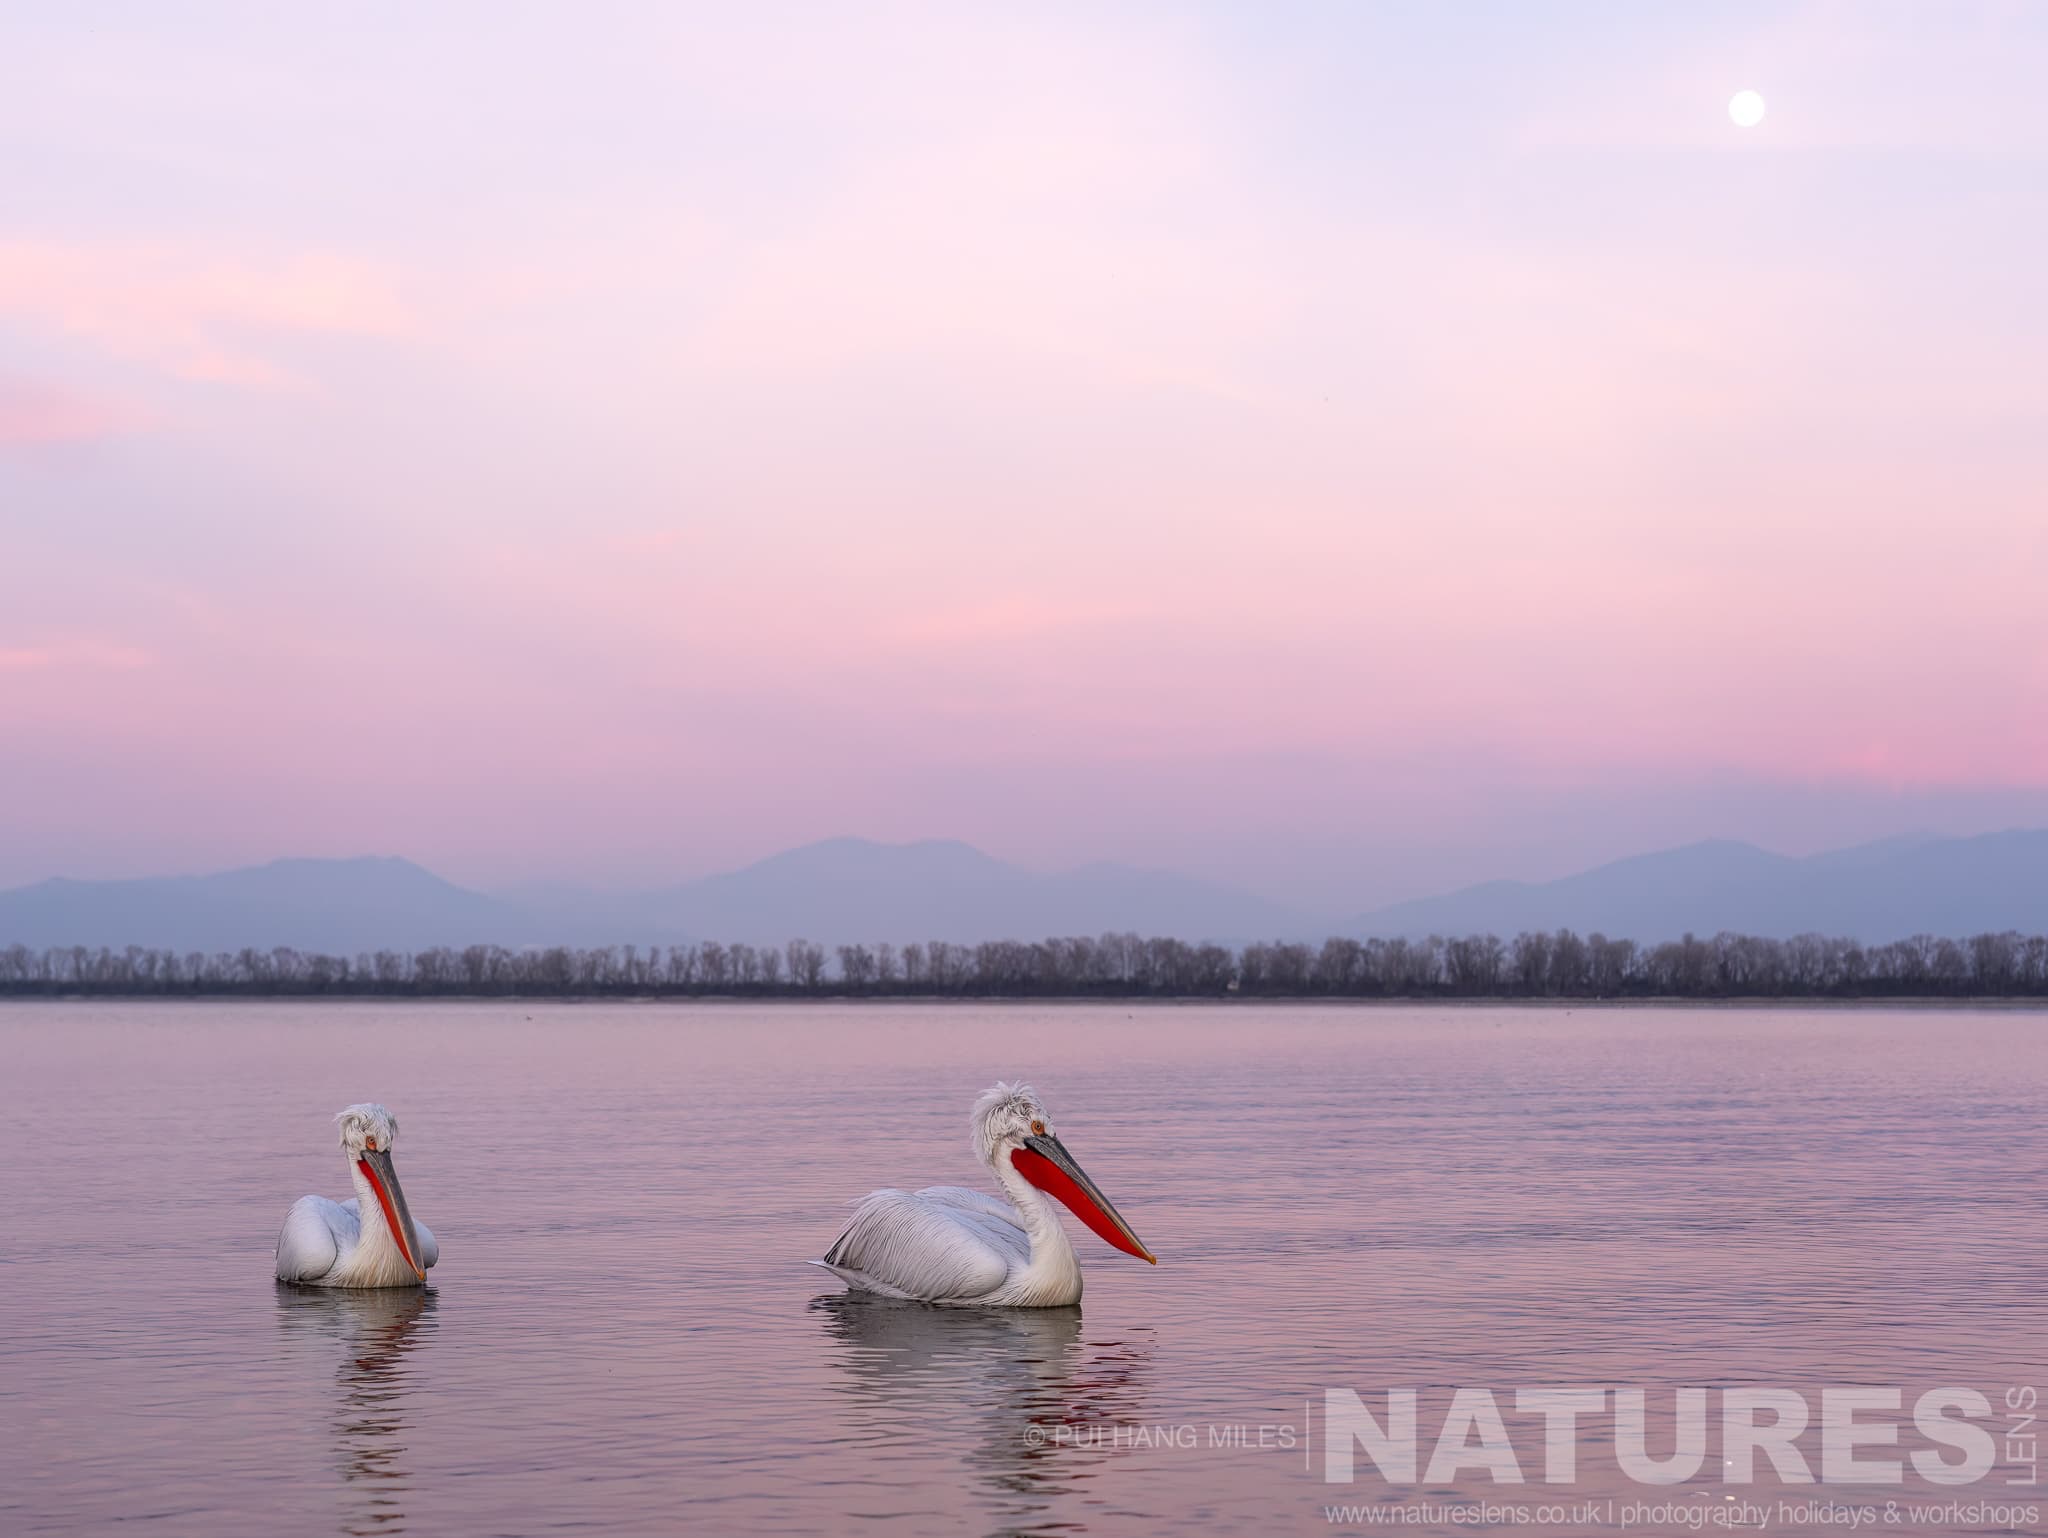 A duo of the Dalmatian Pelicans of Greece drifting on the waters of Lake Kerkini under the moon